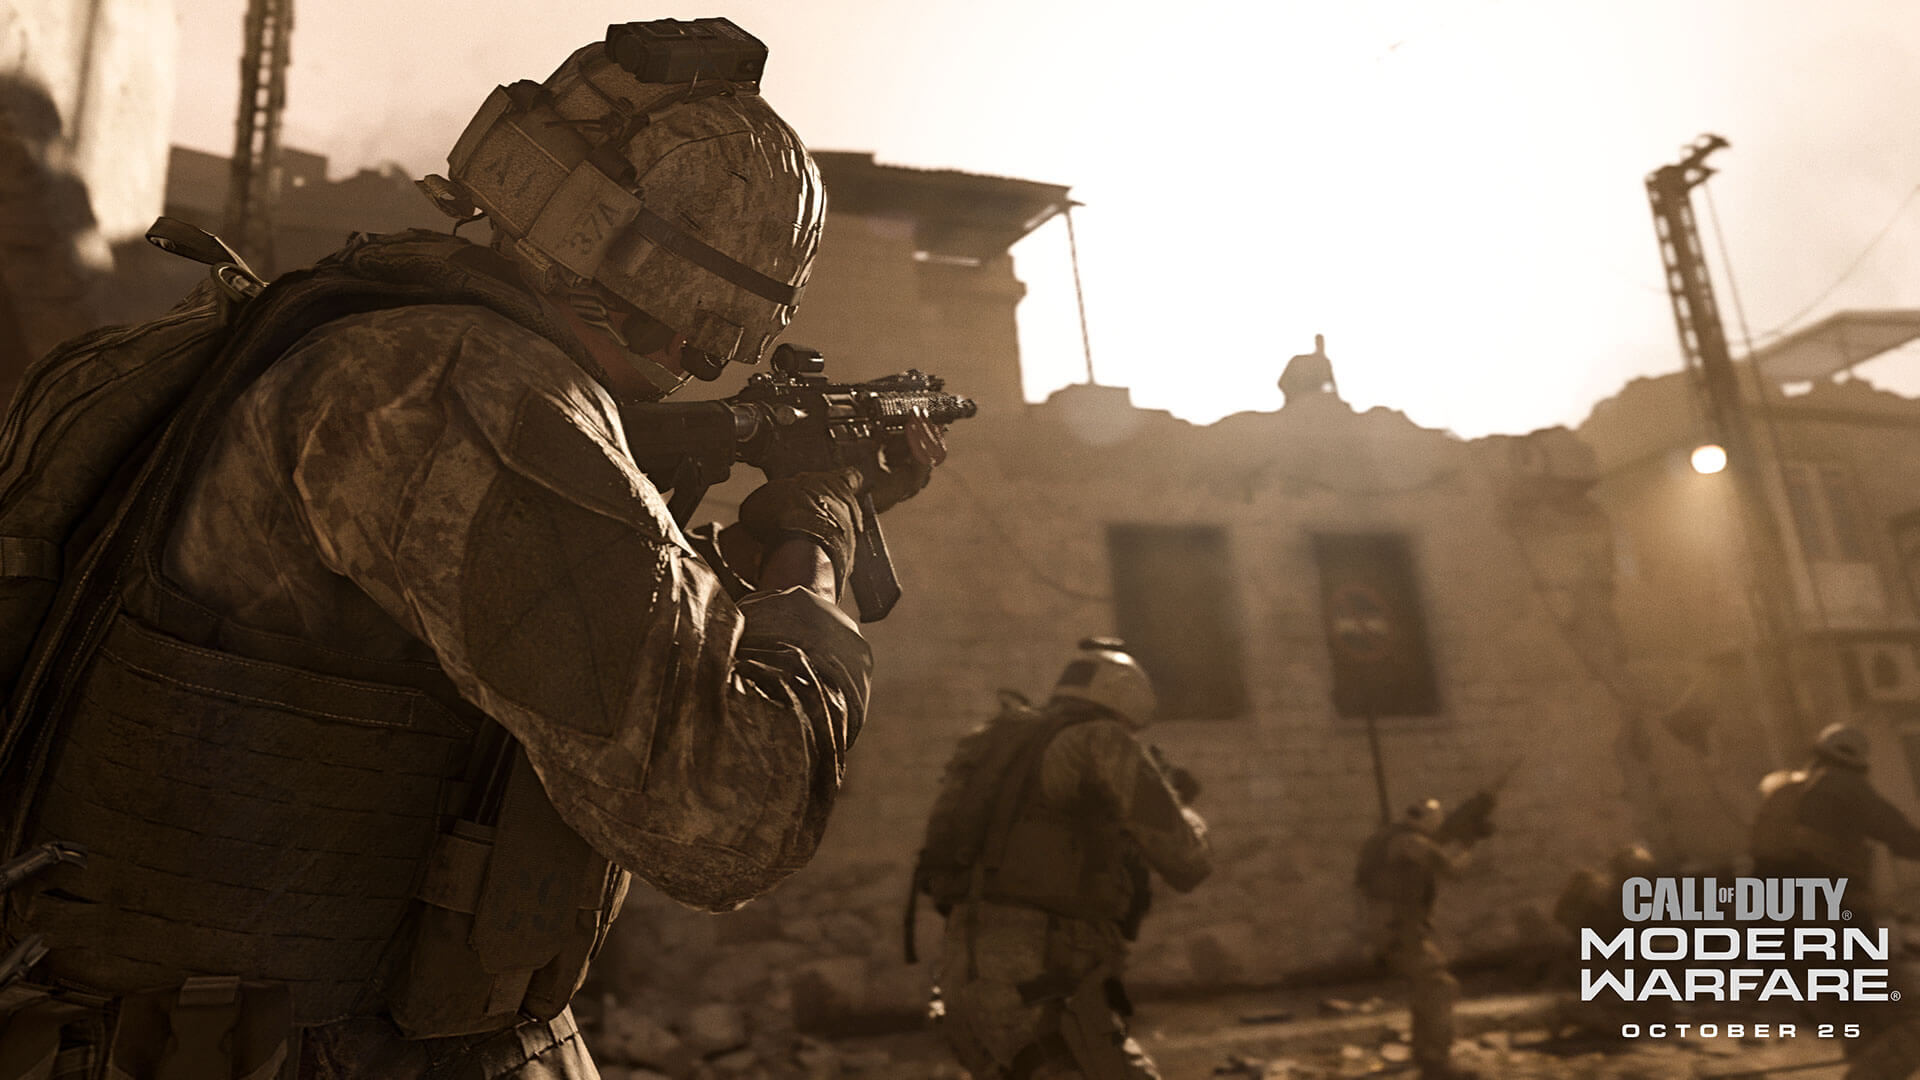 Call of Duty Modern Warfare PC Open Beta available for preload, PC